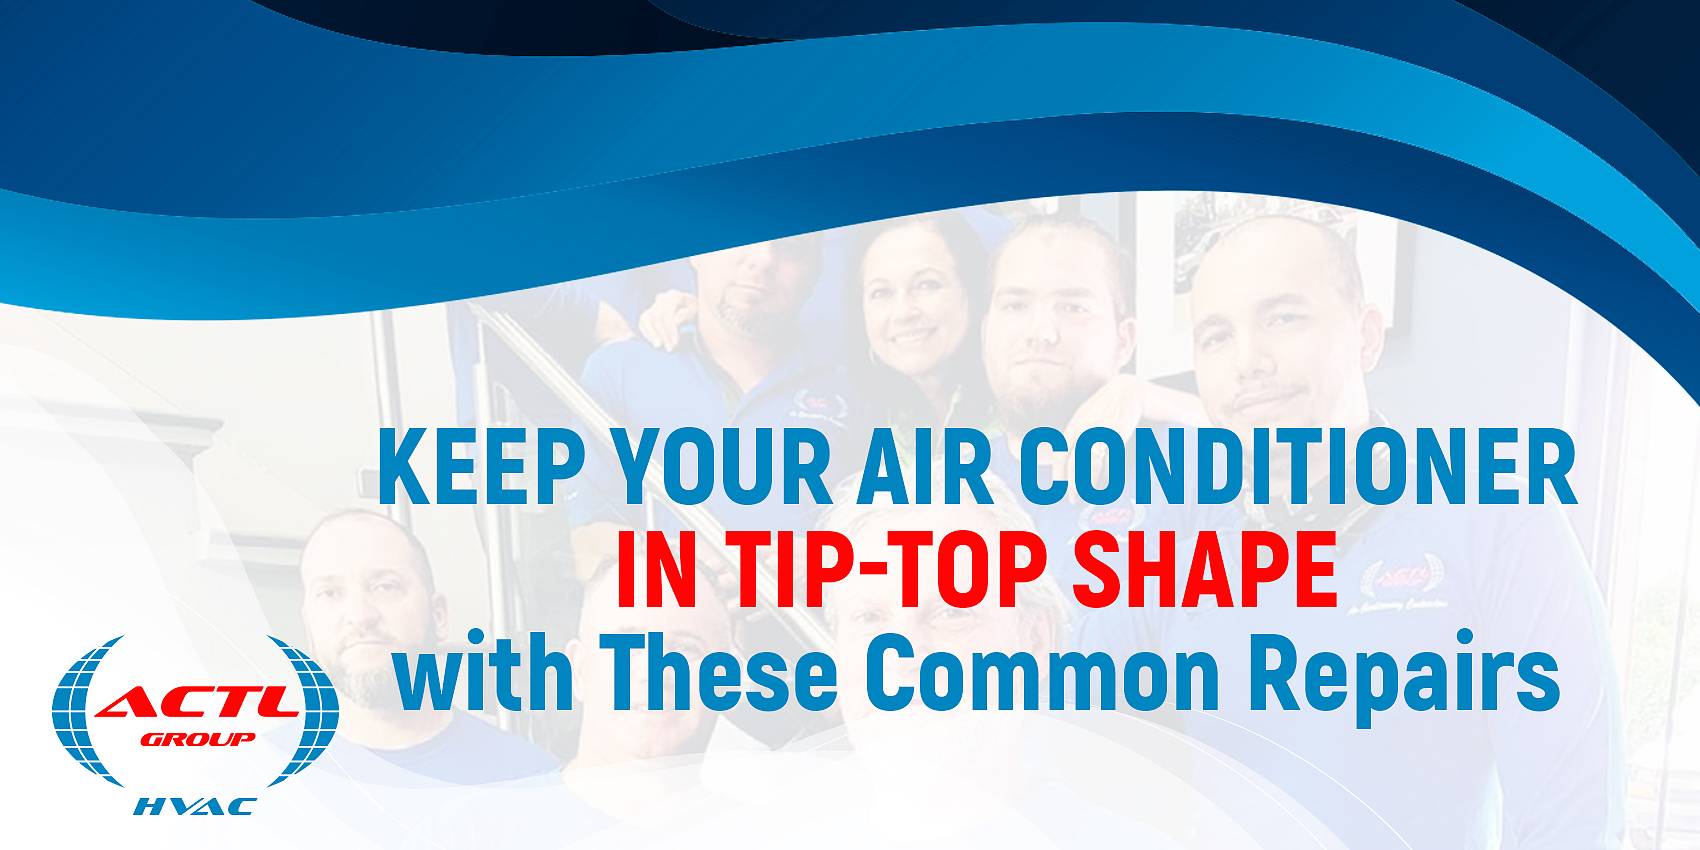 actl group Keep Your Air Conditioner in Tip-Top Shape with These Common Repairs